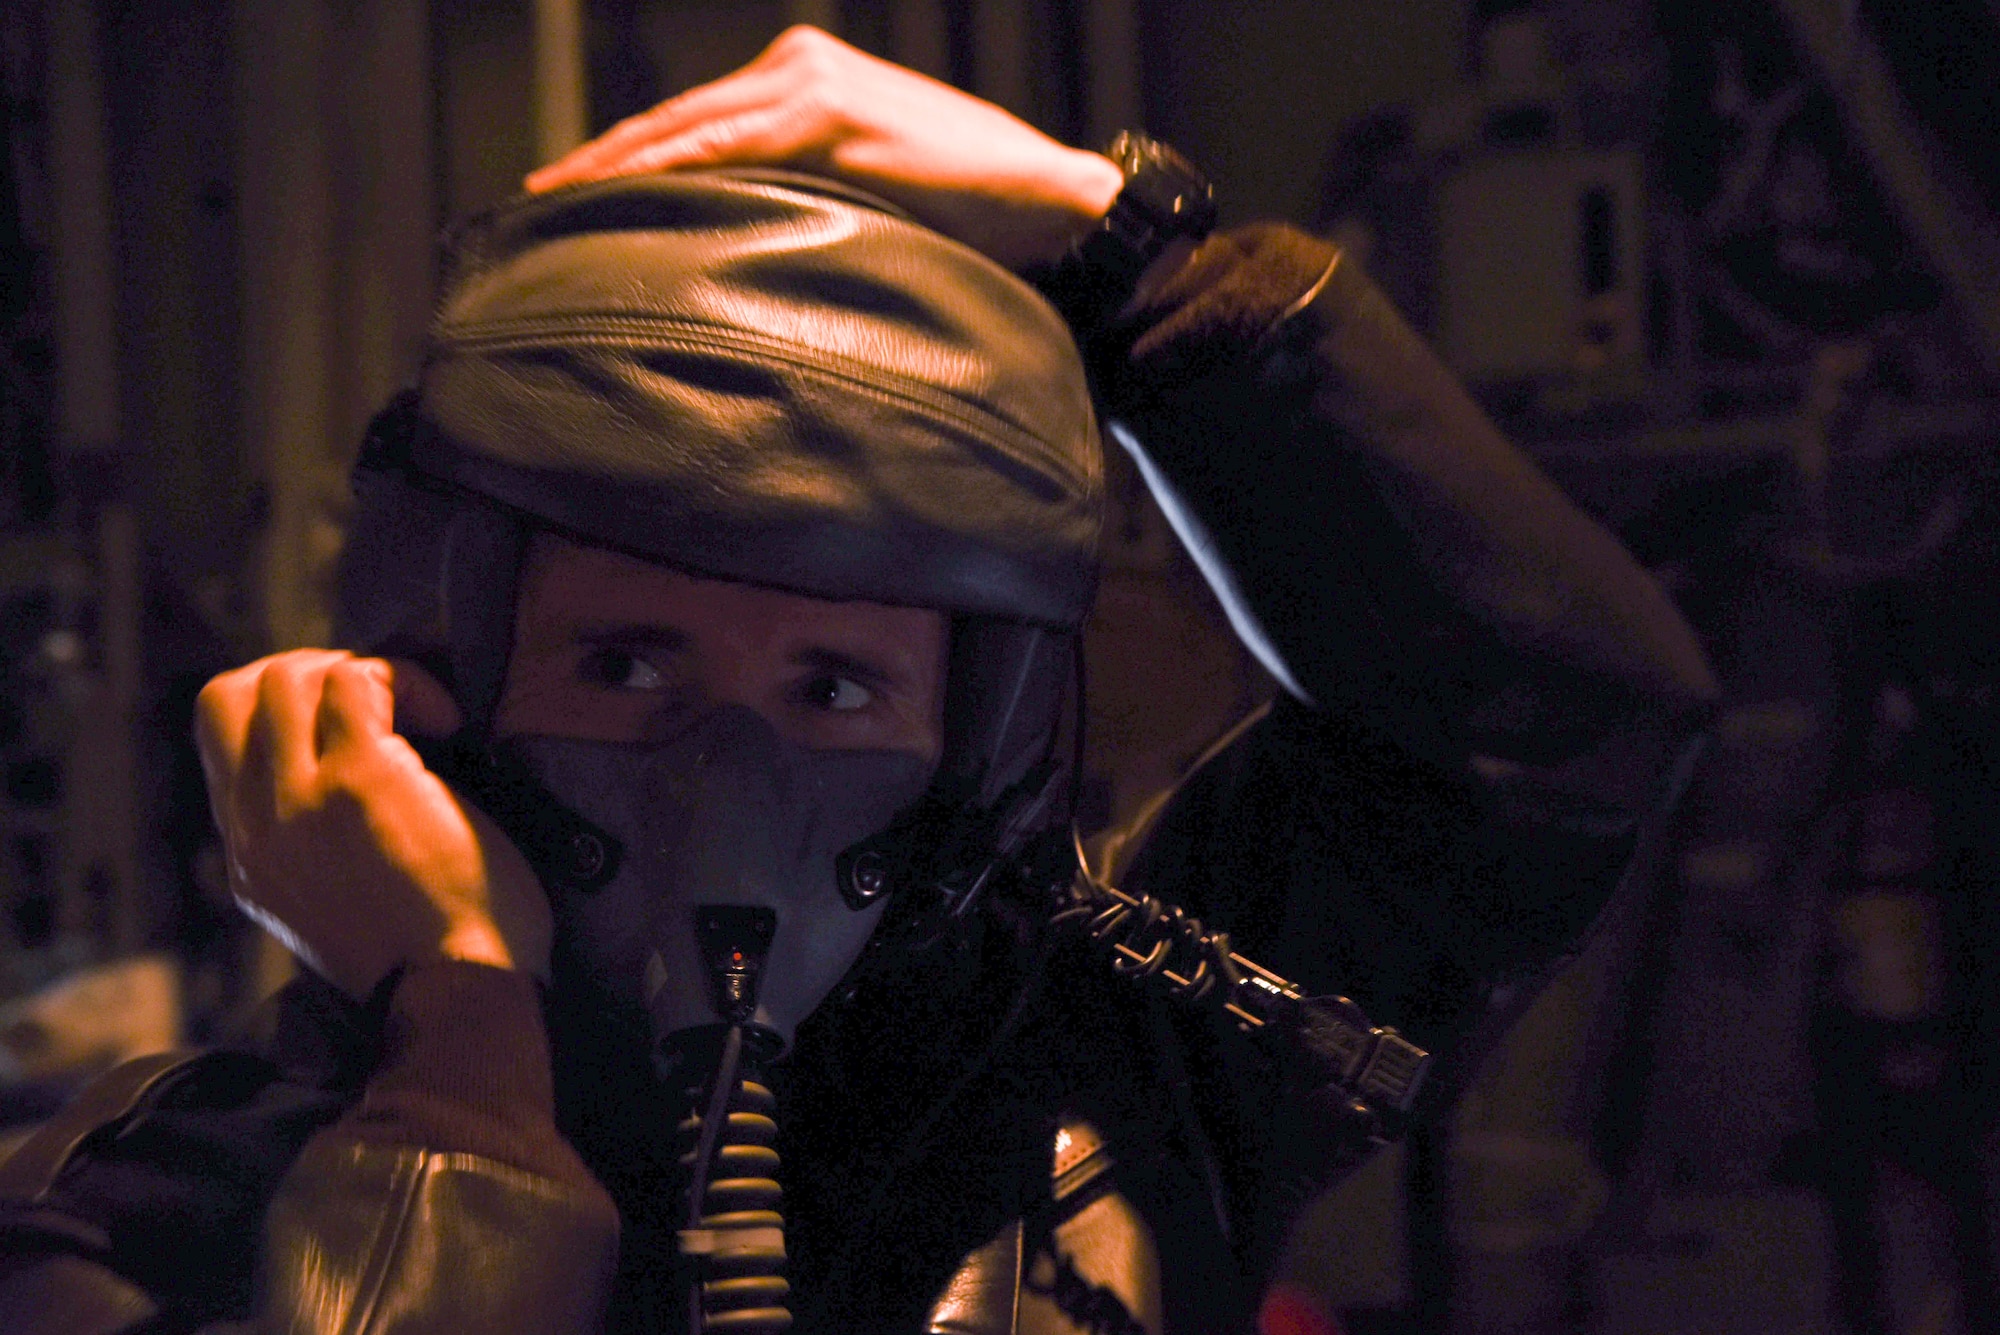 U.S. Air Force Staff Sgt. Jonathan Stager, 29th Weapons Squadron instructor loadmaster, checks his oxygen mask and communication system during pre-flight procedures Feb. 3, 2017, at Little Rock Air Force Base, Ark. Inspecting an oxygen mask ensures that in the event of an emergency, oxygen is readily available. (U.S. Air Force photo by Senior Airman Stephanie Serrano)